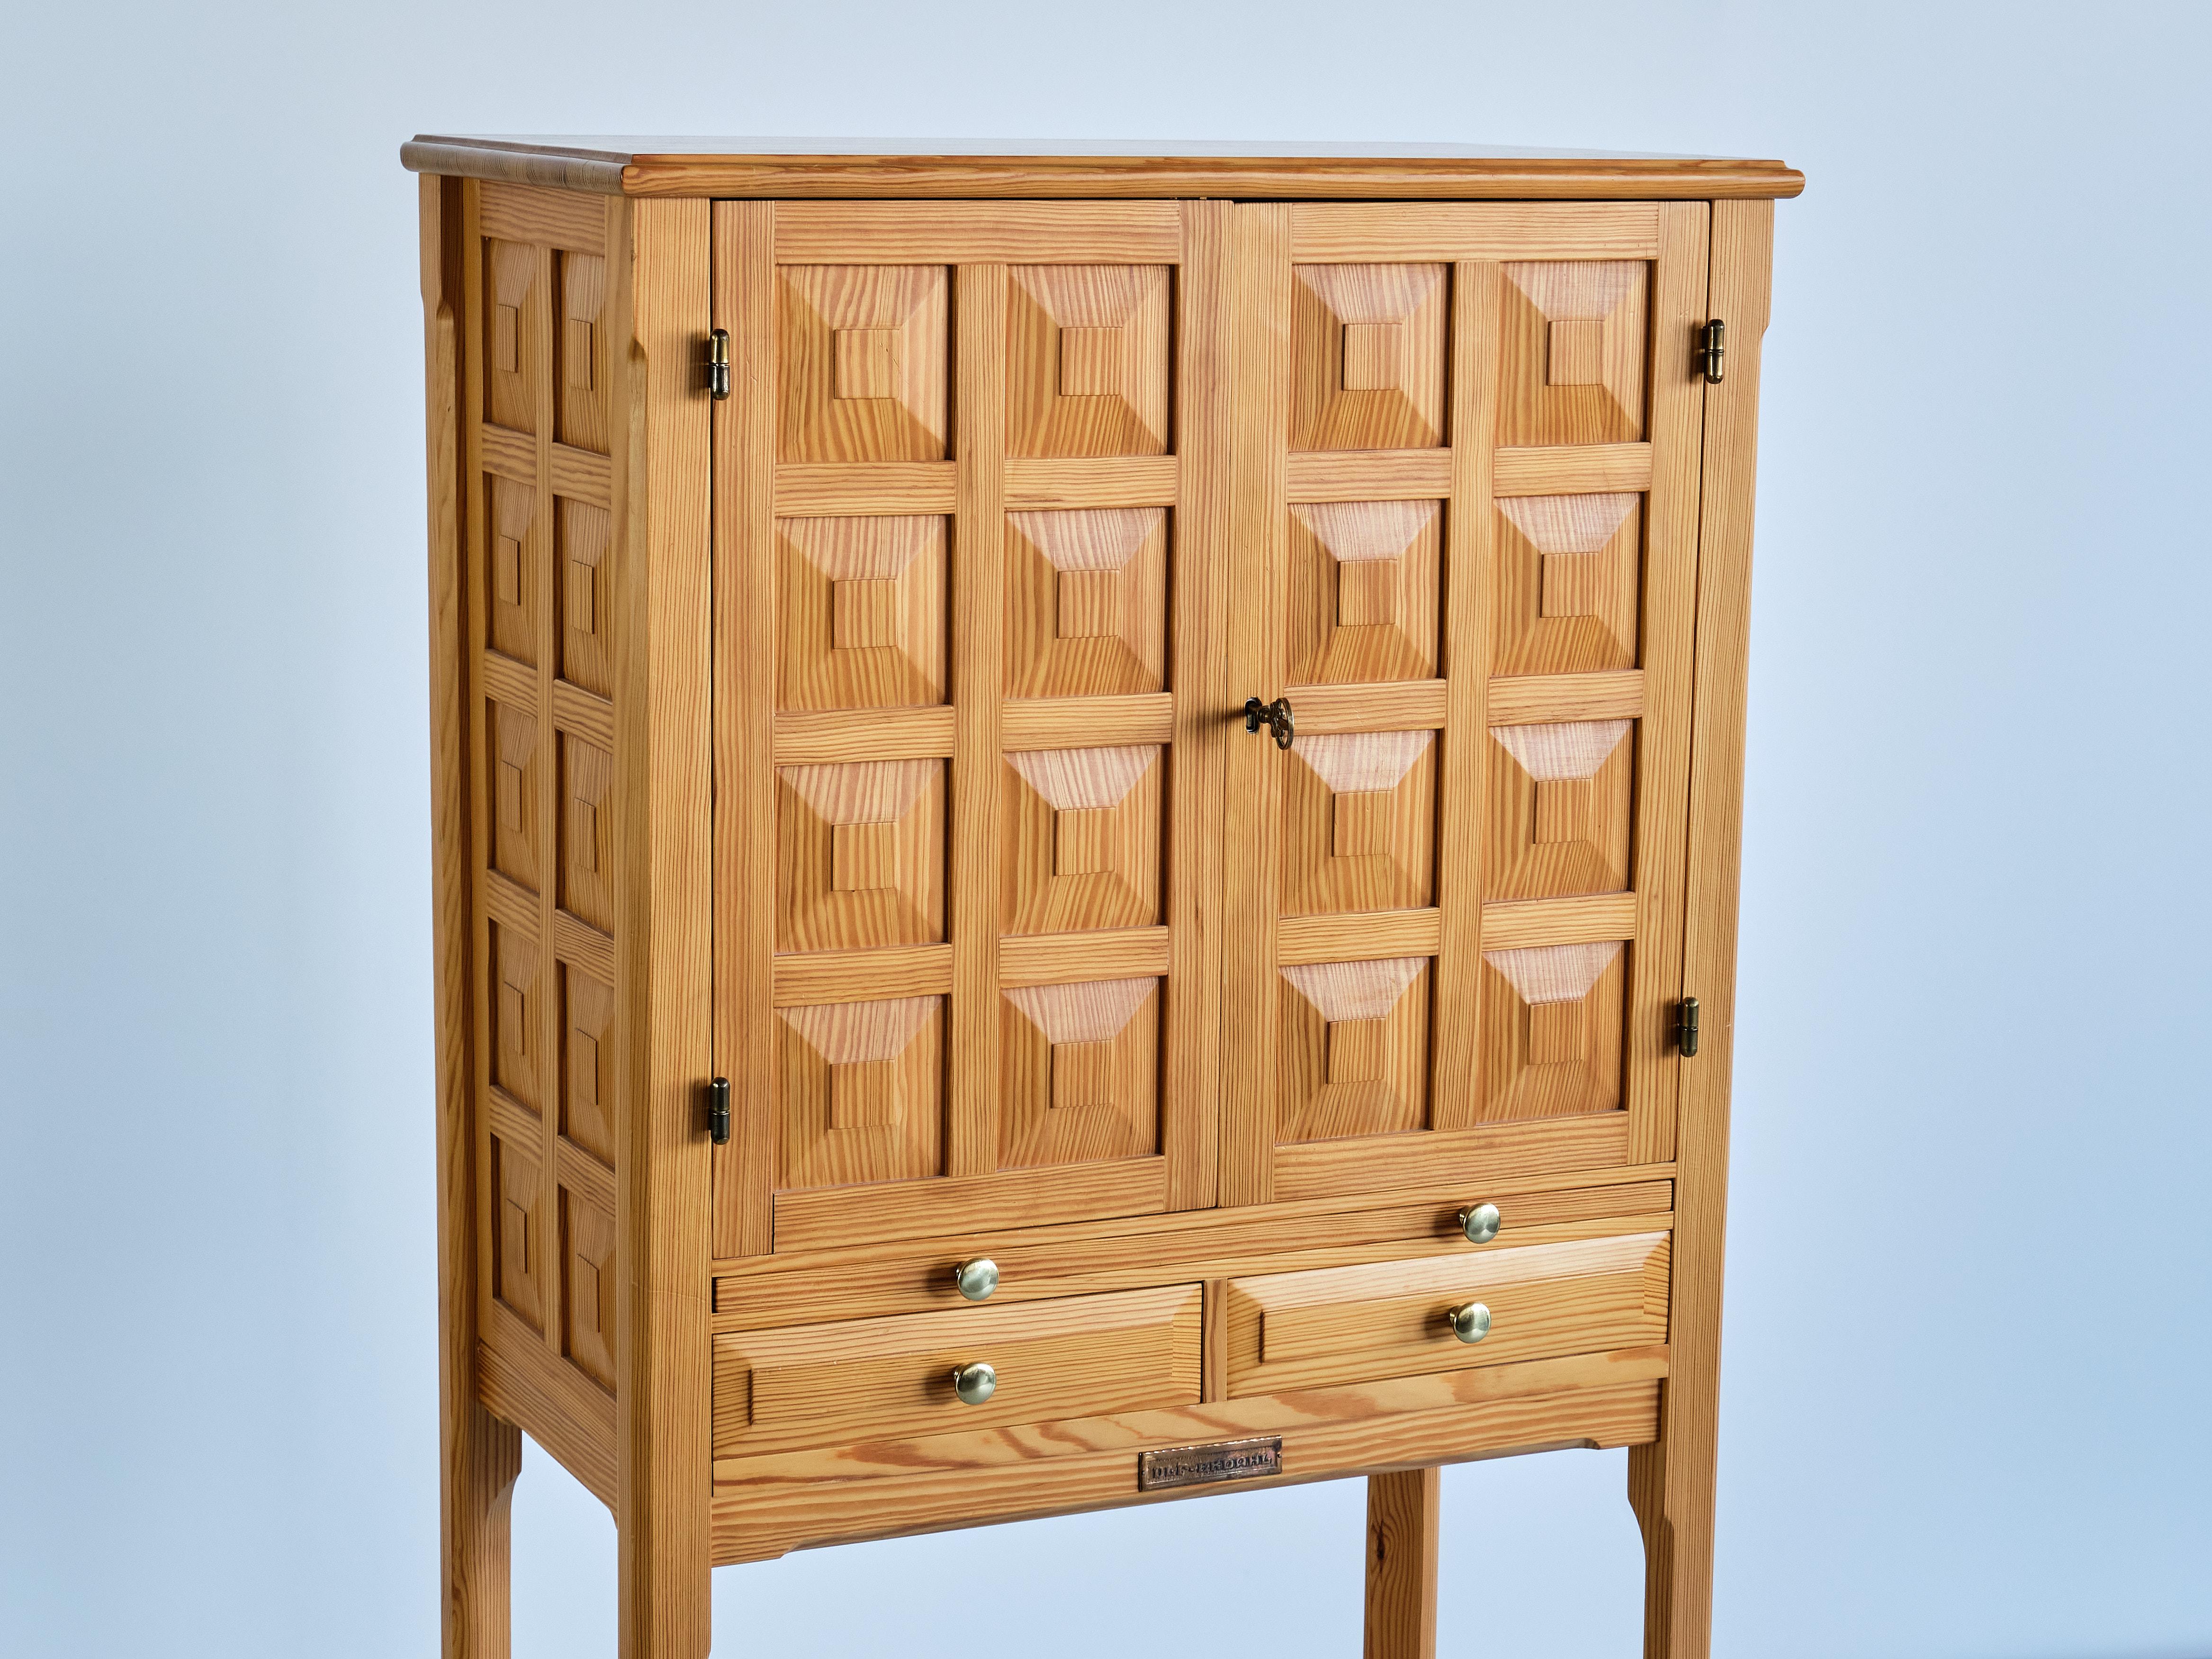 Scandinavian Modern Ulf Ekdahl Cabinet in Solid Pine Wood and Brass, Nybro, Sweden, 1979 For Sale